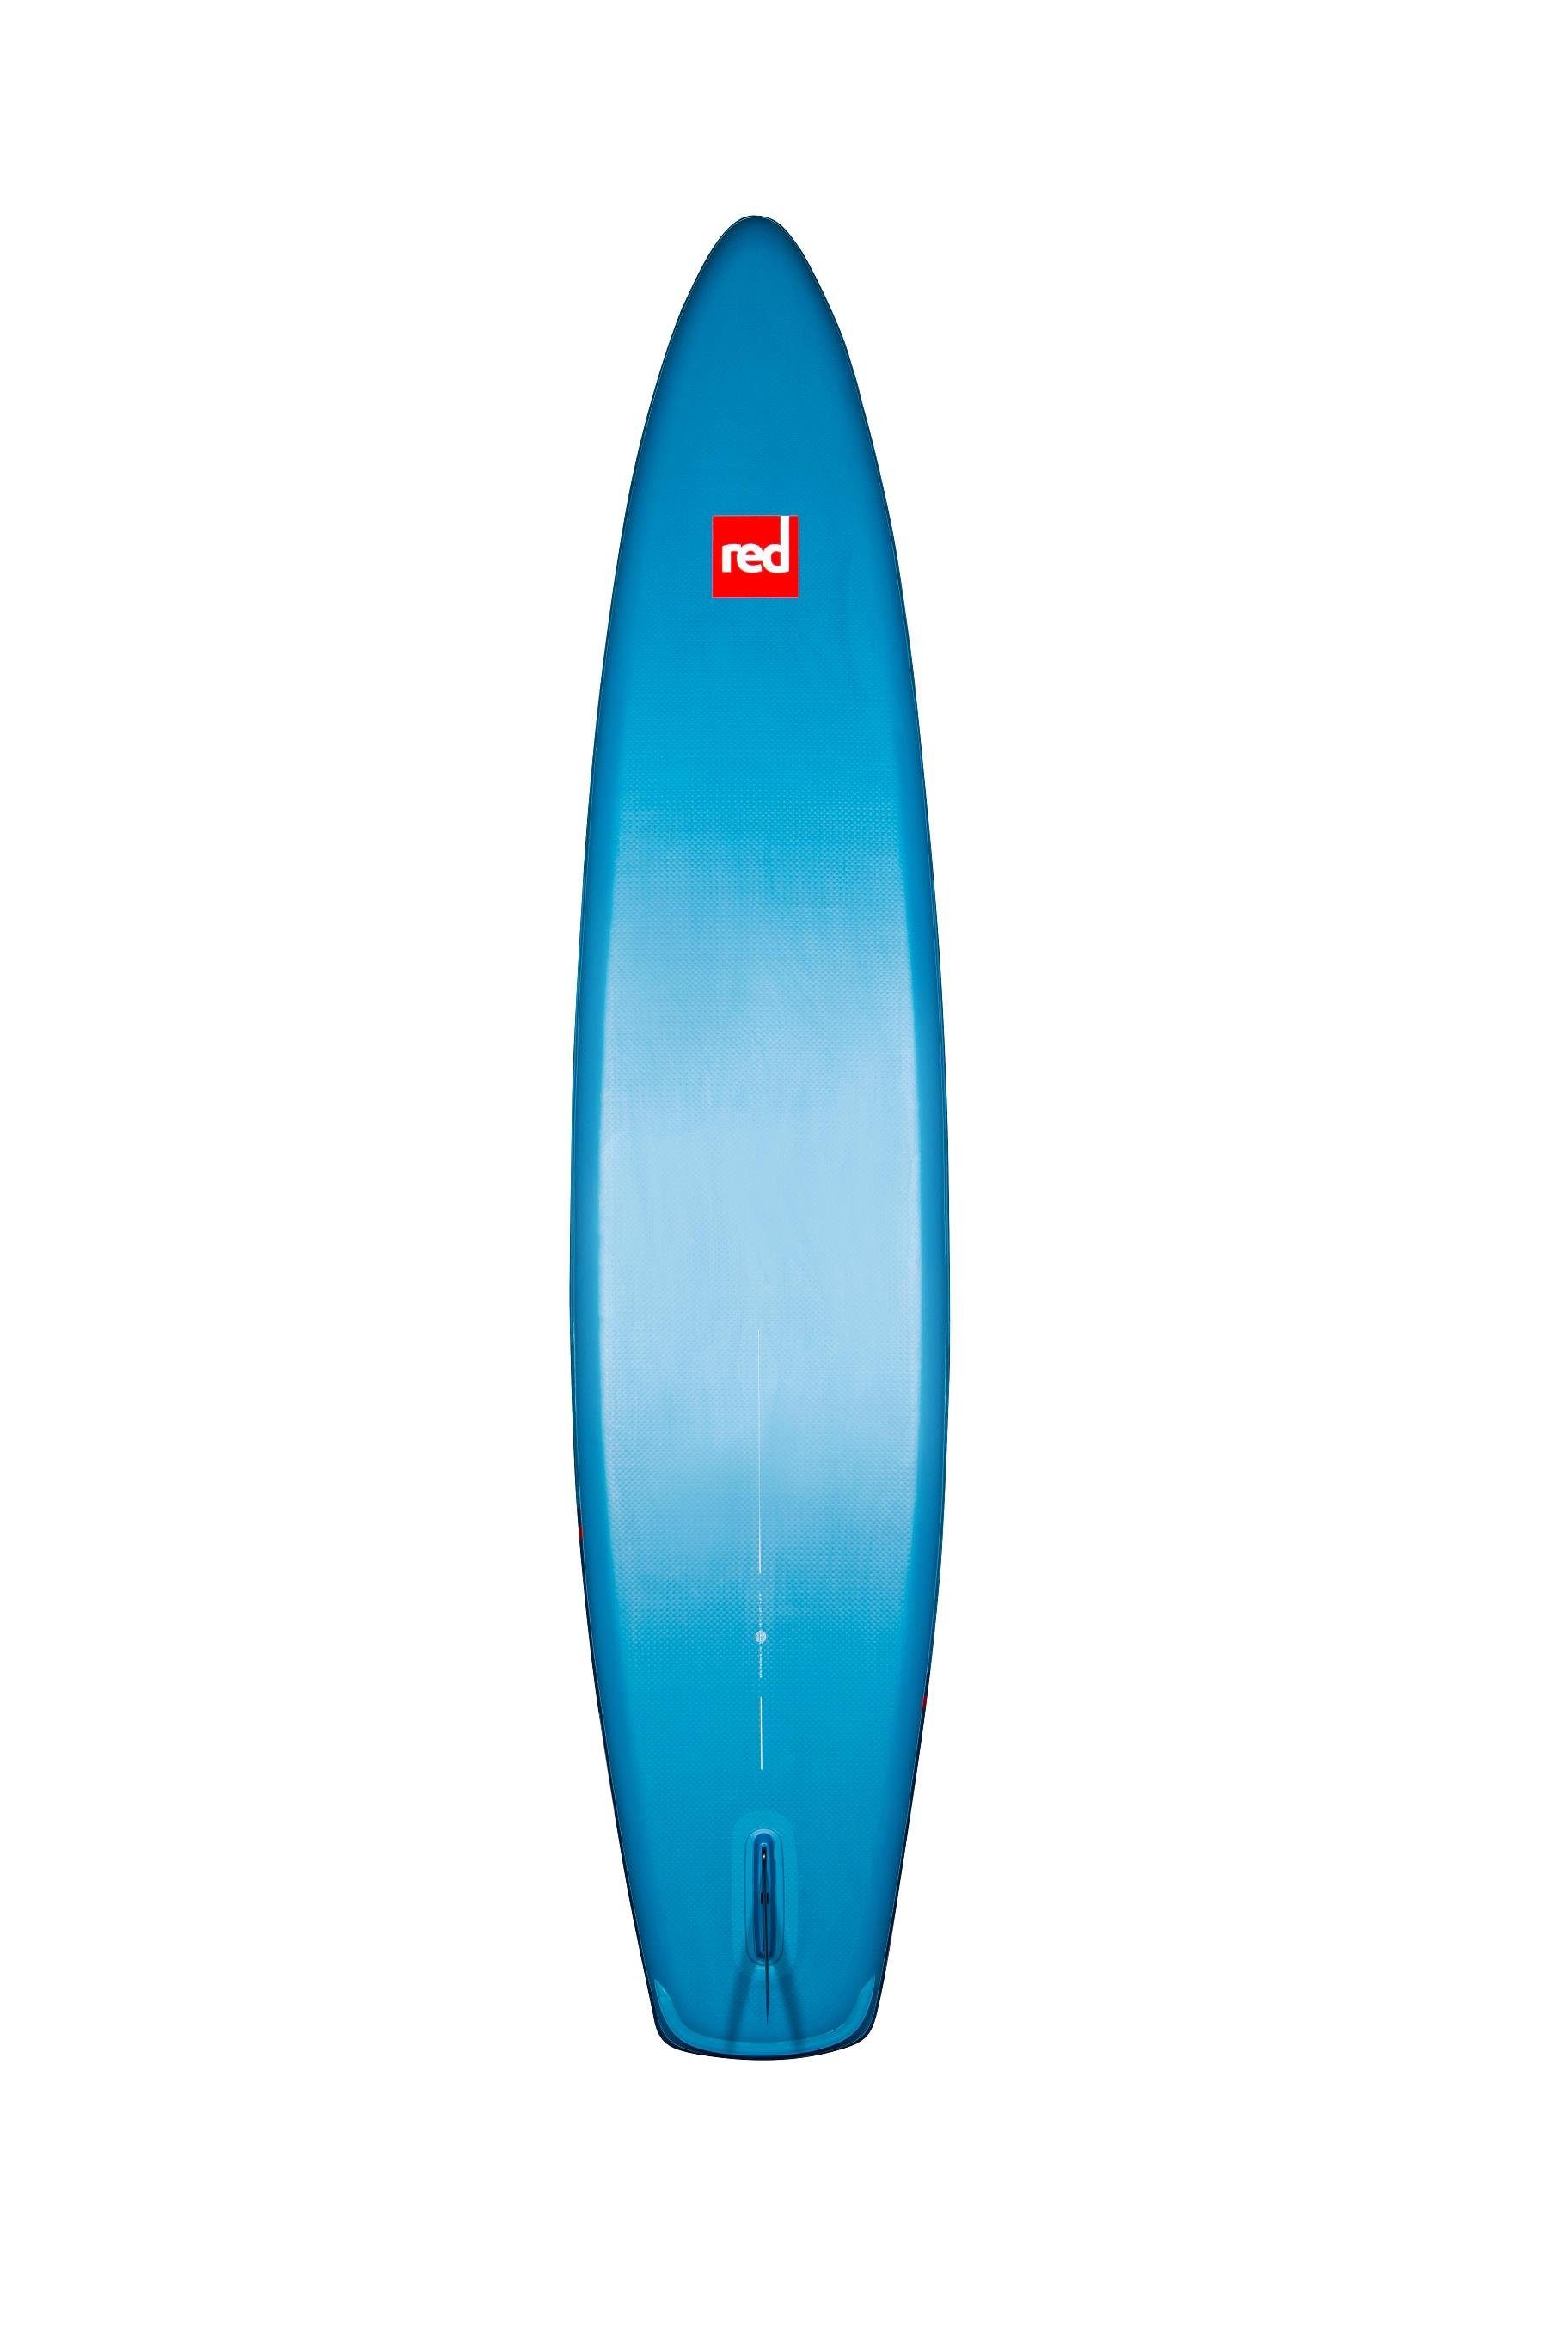 Red Paddle SUP-Board Red x Pumpe mit 30" SPORT 6" BOARD 12'6" Titan x MSL 2 Co SUP Paddle